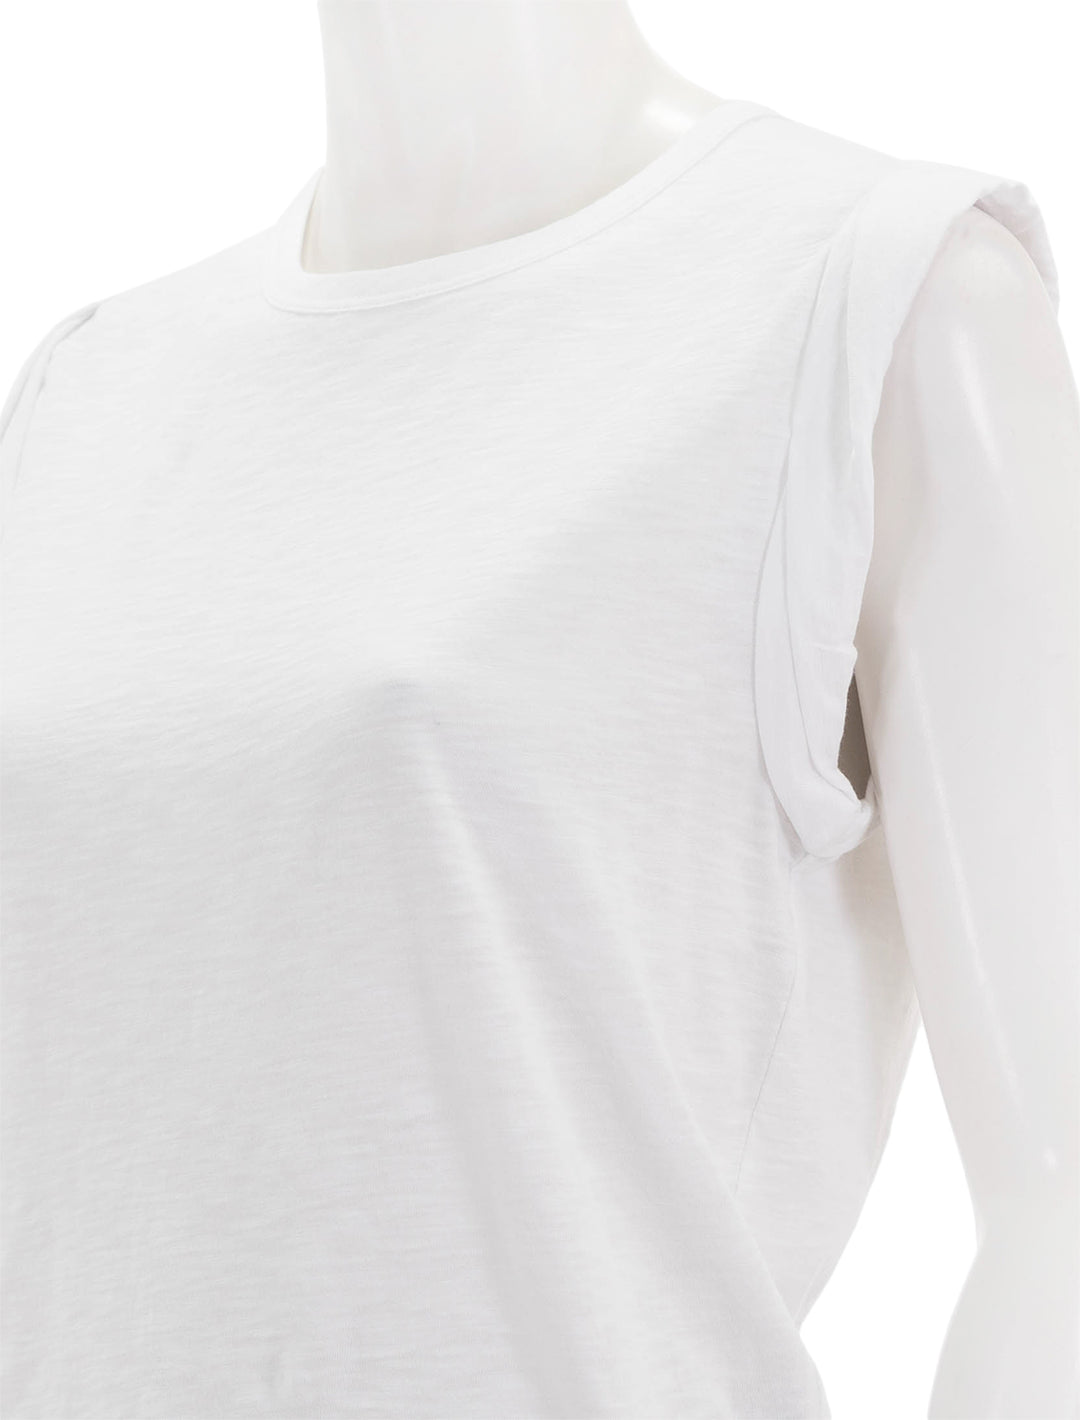 Close-up view of Veronica Beard's dree muscle tee in white.